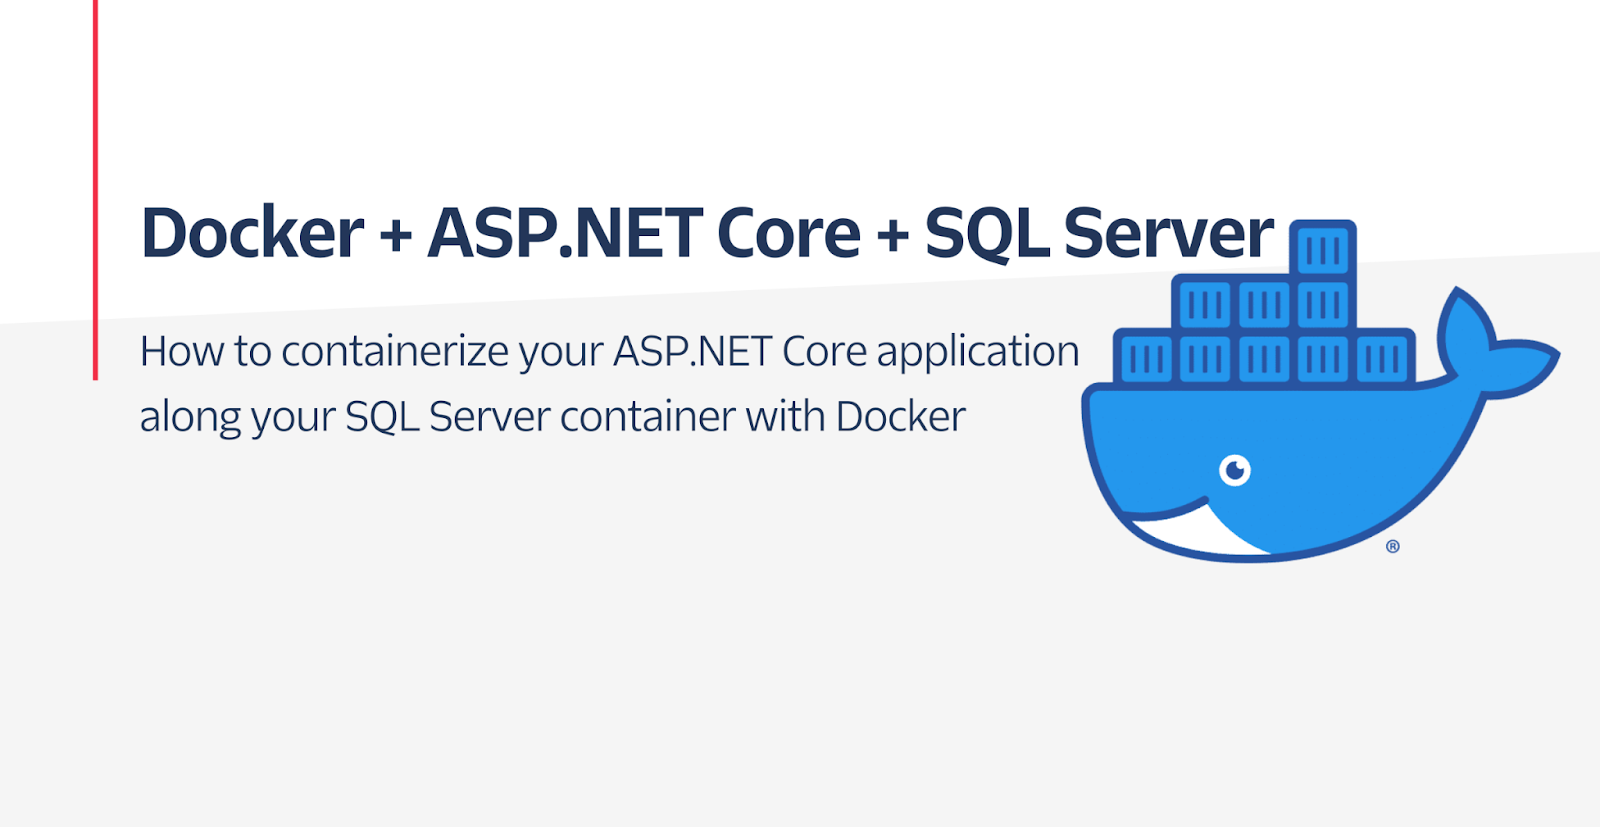 How to containerize your ASP.NET Core application  along your SQL Server container with Docker